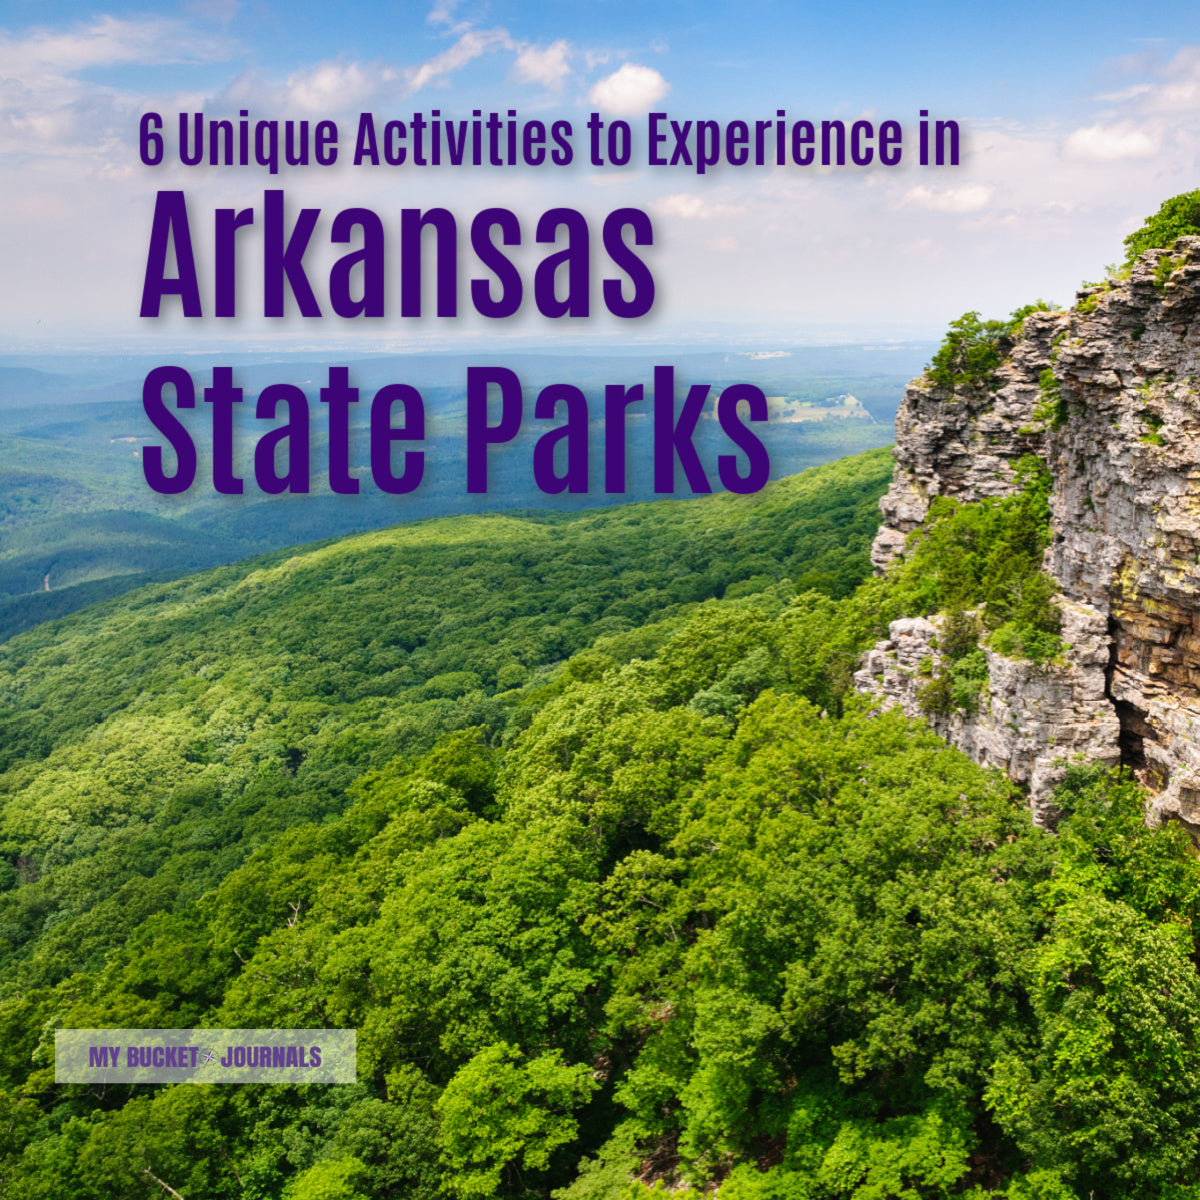 Aerial view of Mount Magazine state park in Arkansas with a text overlay saying 6 unique activities to experience in Arkansas State Parks